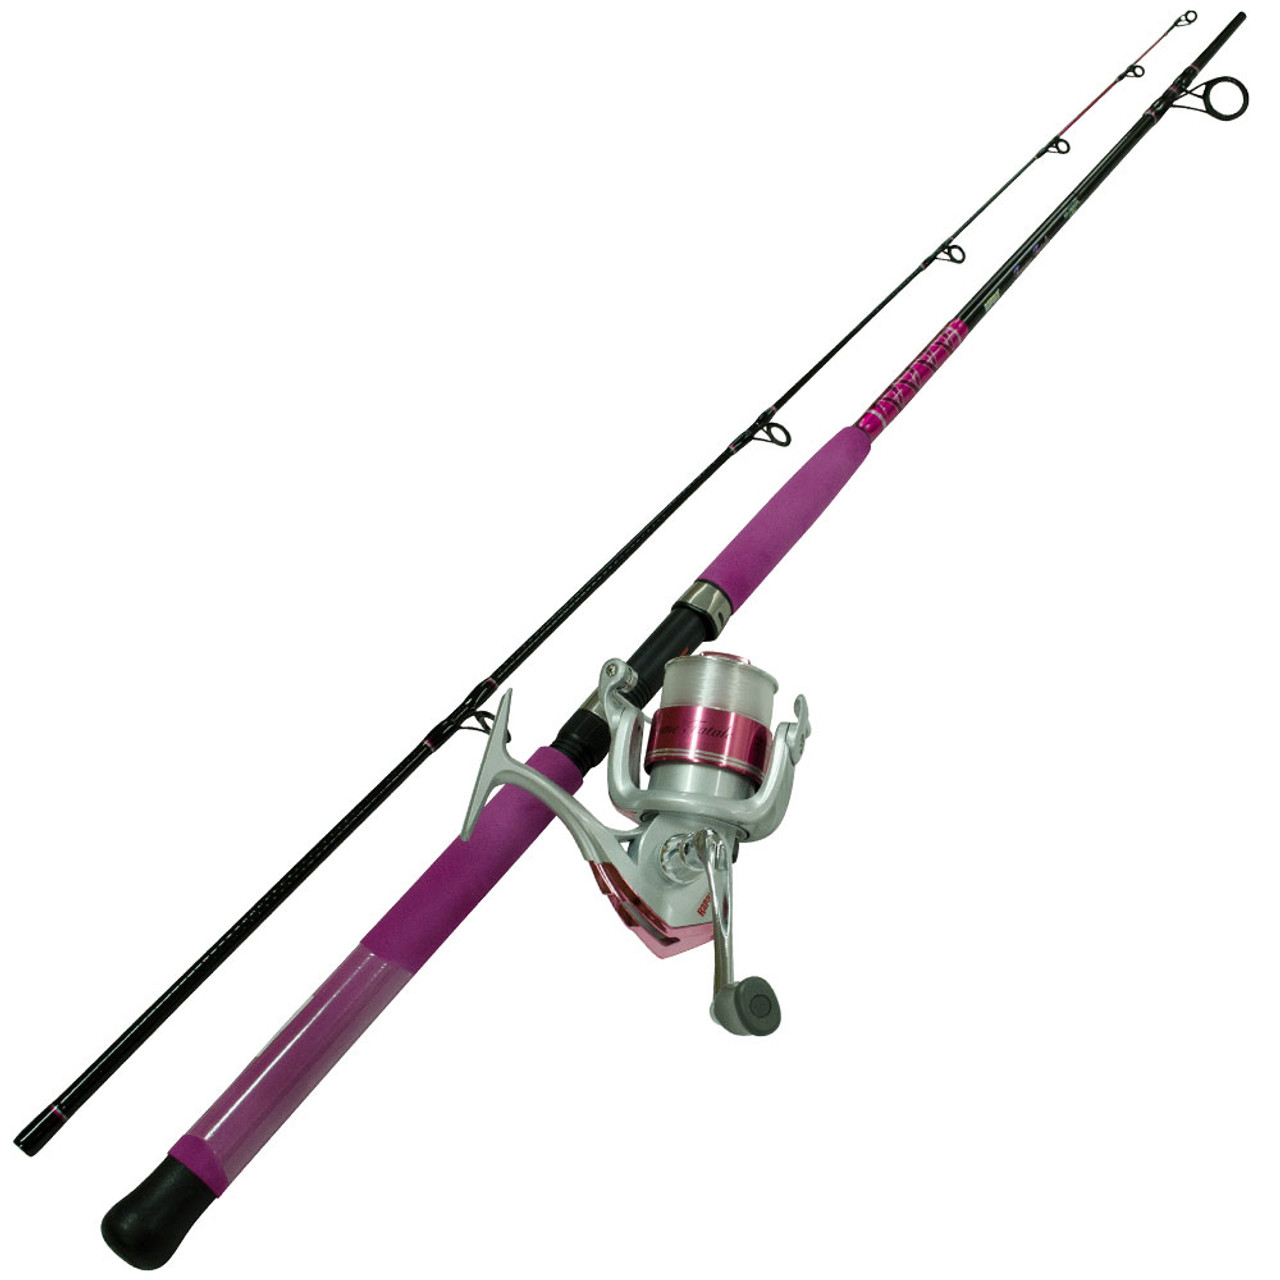 7ft Rapala Femme Fatale 3-6kg Pink Fishing Rod and Reel Combo